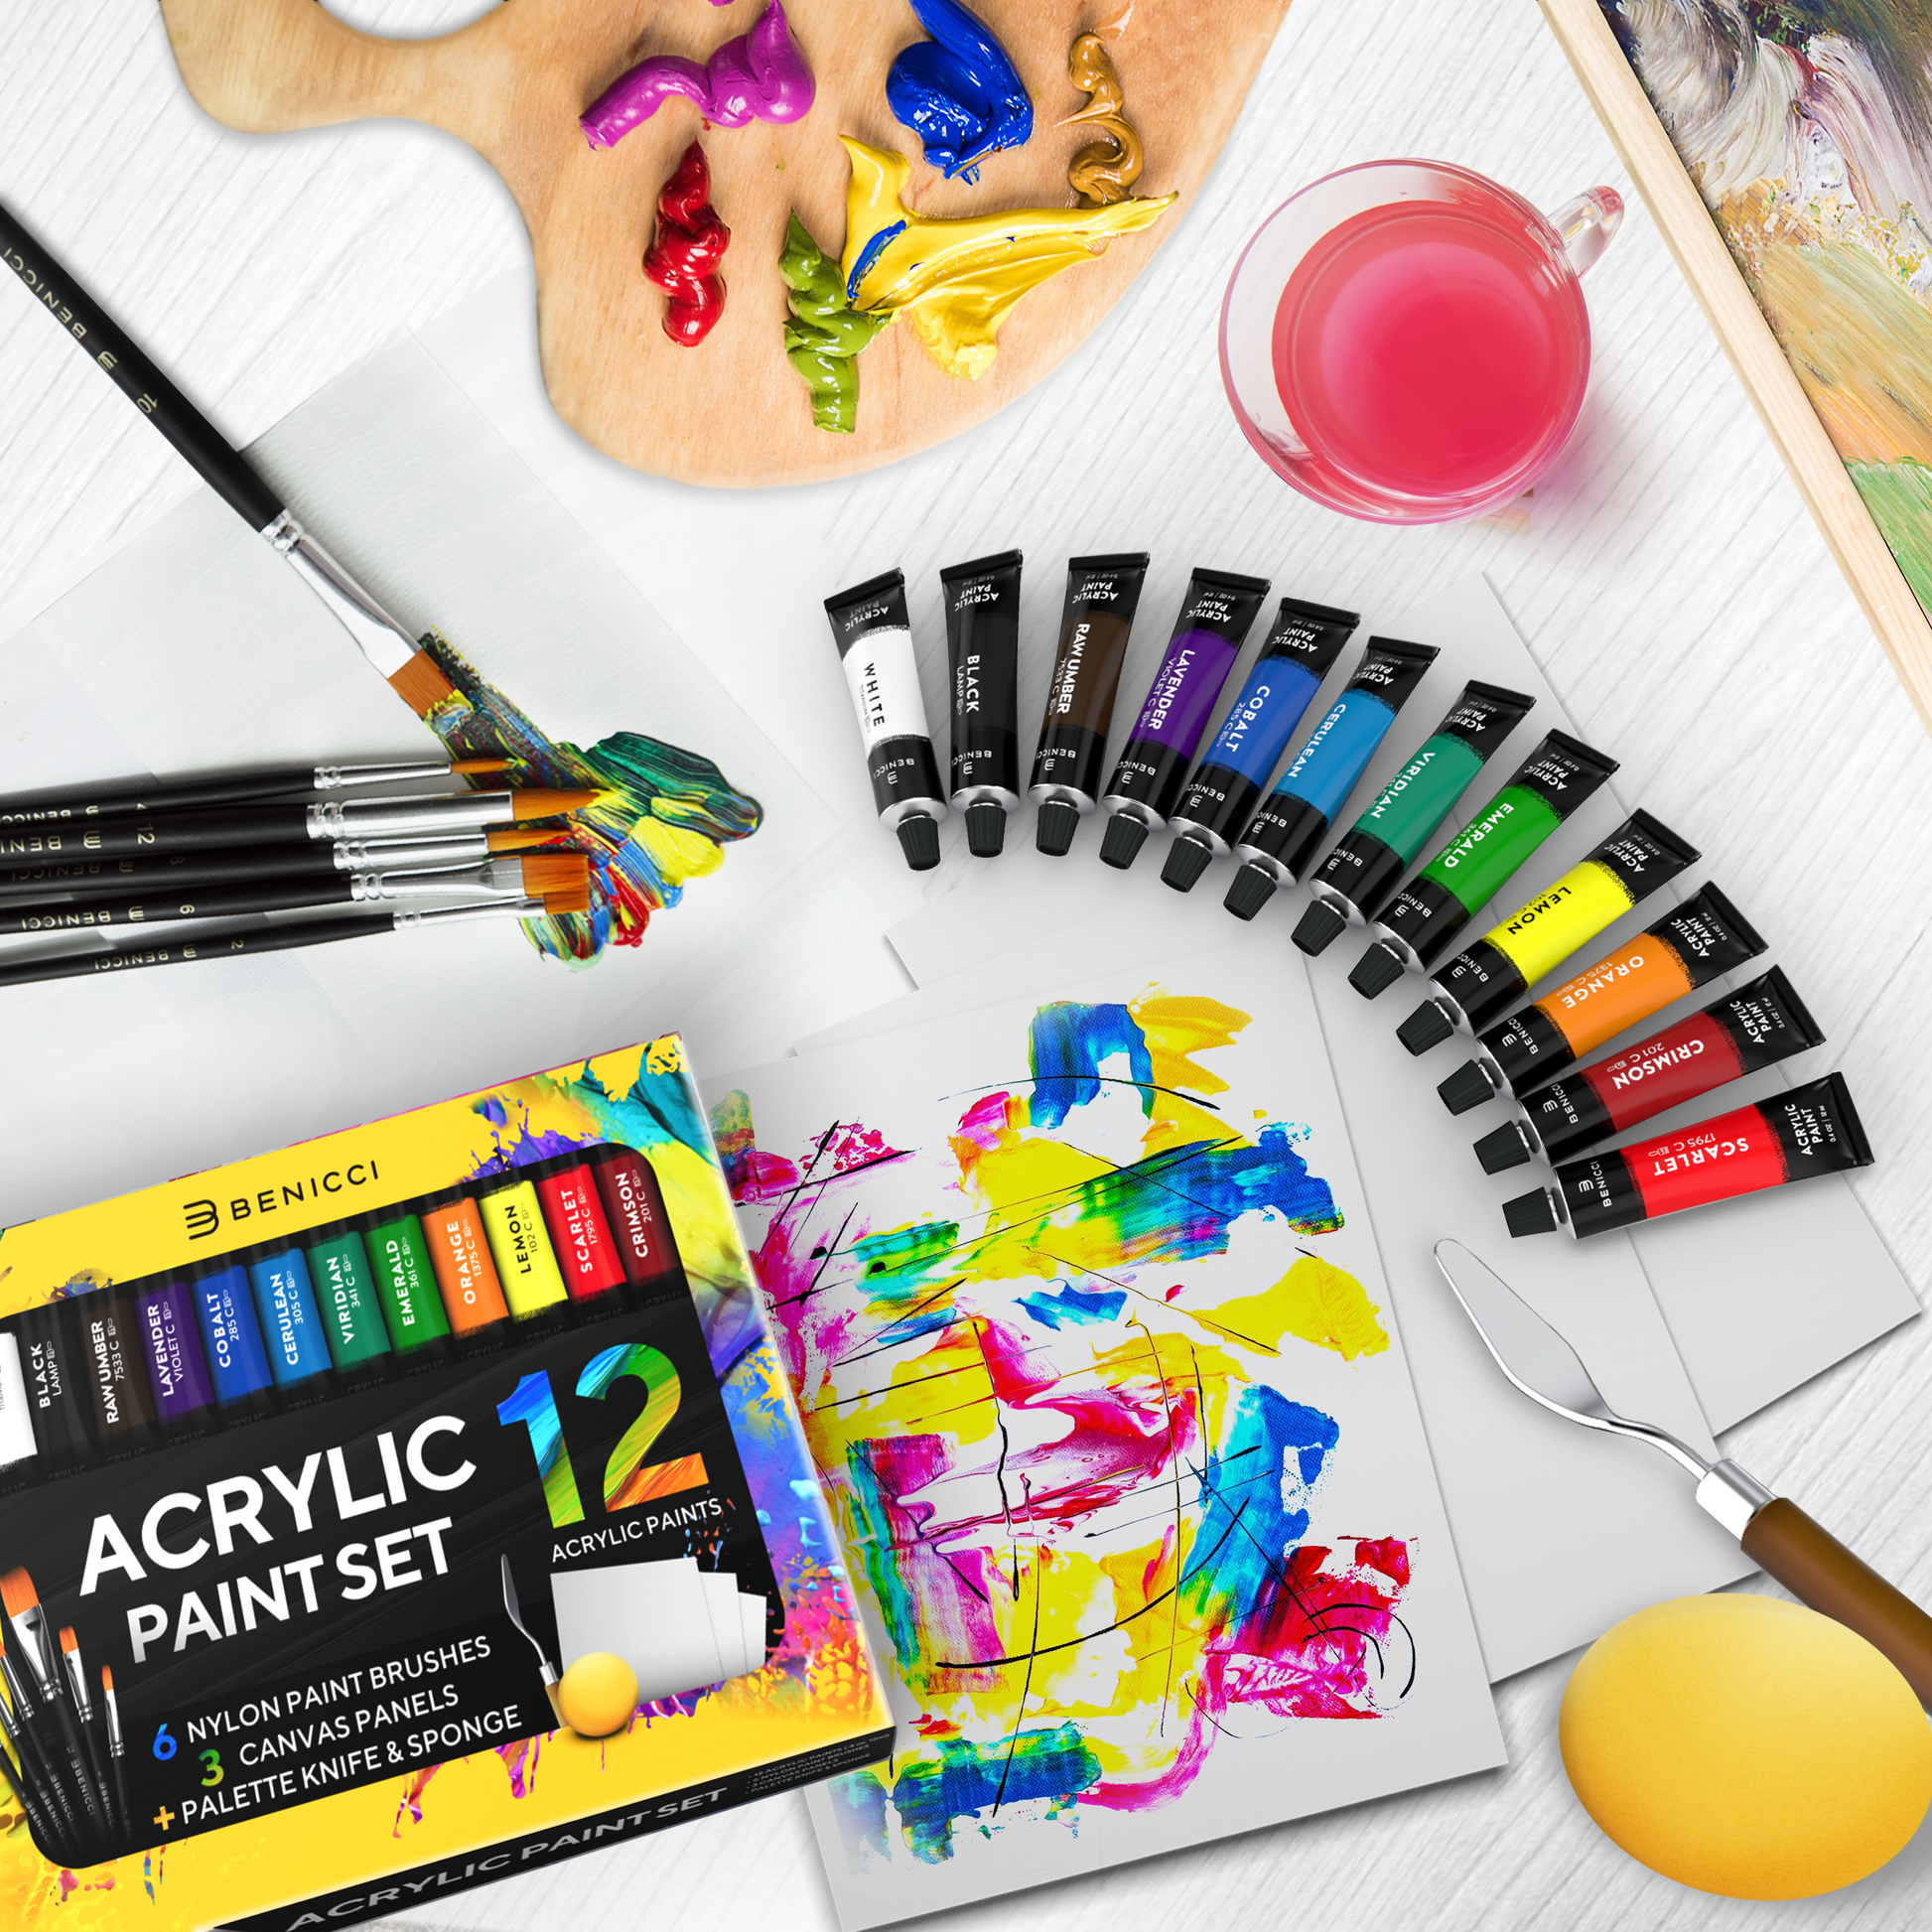 Lartique Painting Supplies, Acrylic Paint Set - Painting Kits for Adults  and Kids – Includes, 24 Acrylic Paint Colors, 10 Professional Paintbrushes,  2